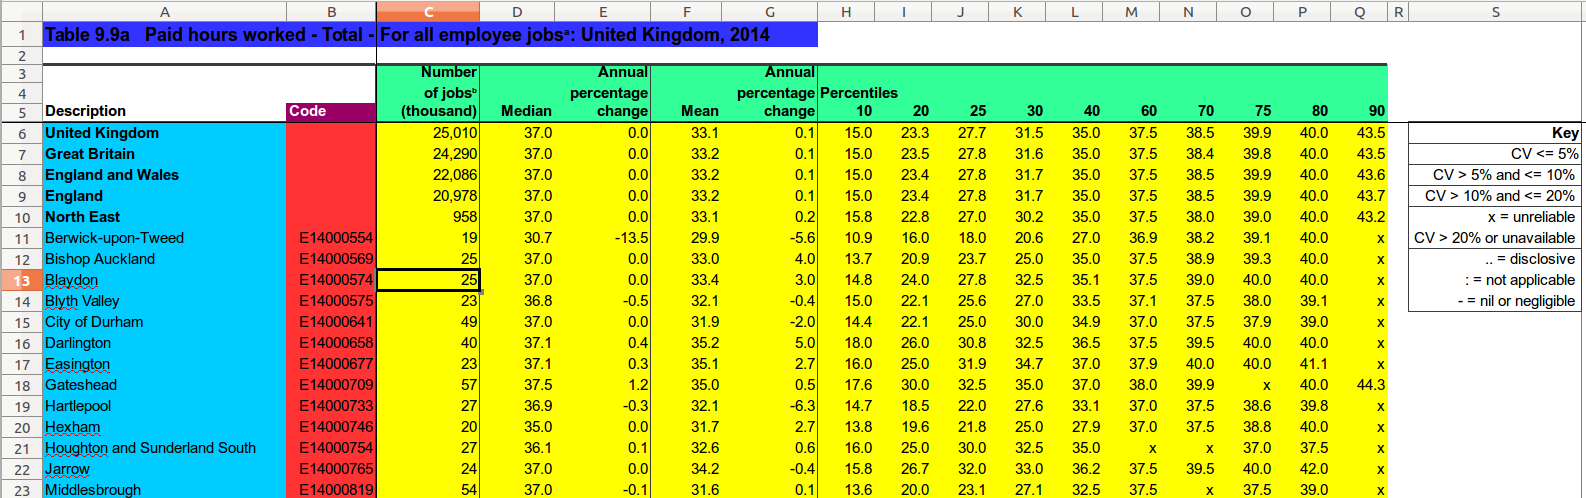 Spreadsheet with different sections highlighted.